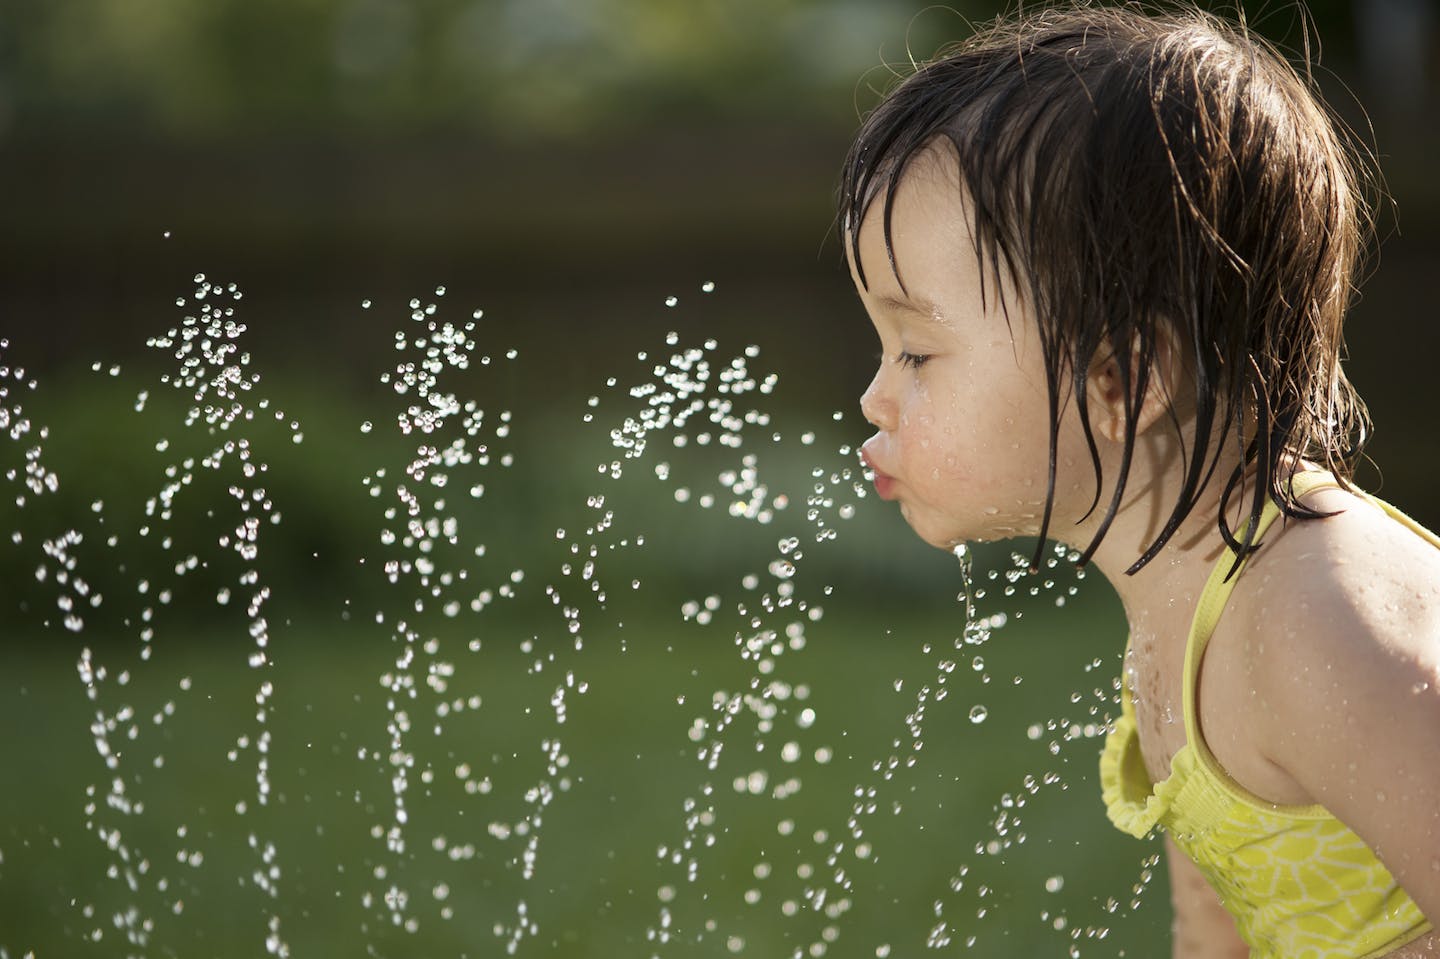 https://drip-drop.imgix.net/articles/baby-playing-with-water.png?w=1440&fit=max&auto=format&auto=compress